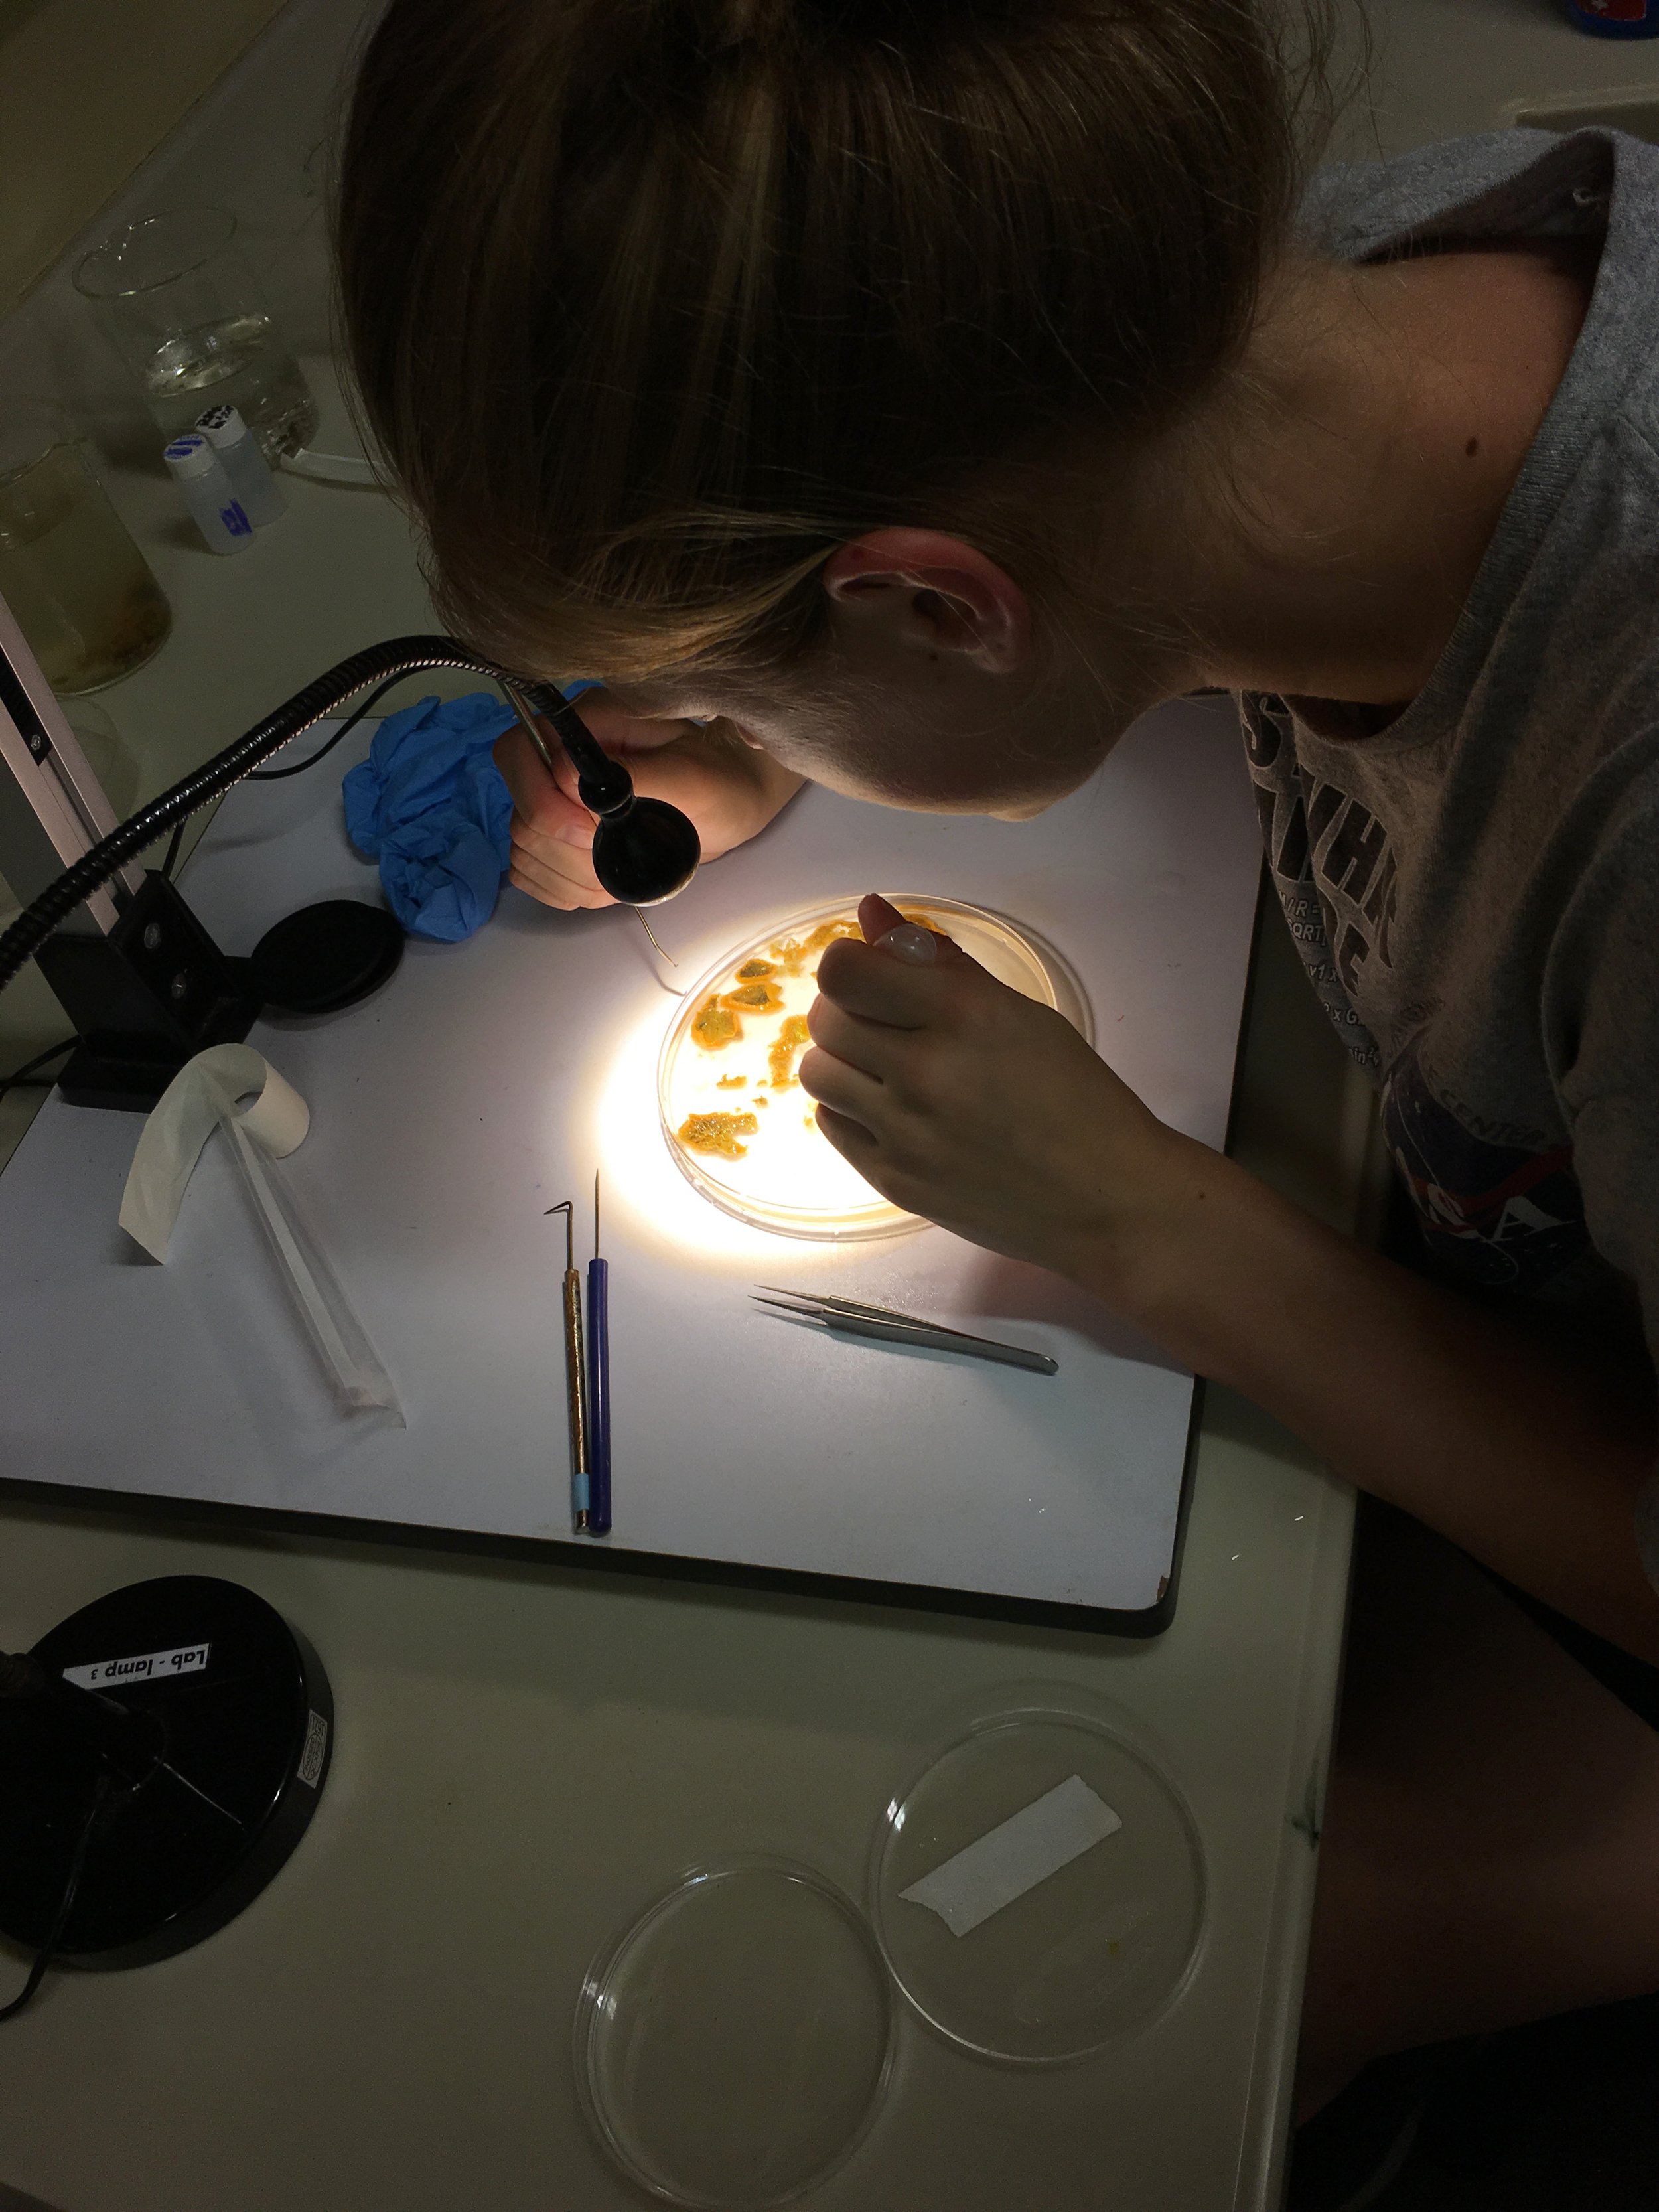  Dissecting sponges to find larvae 